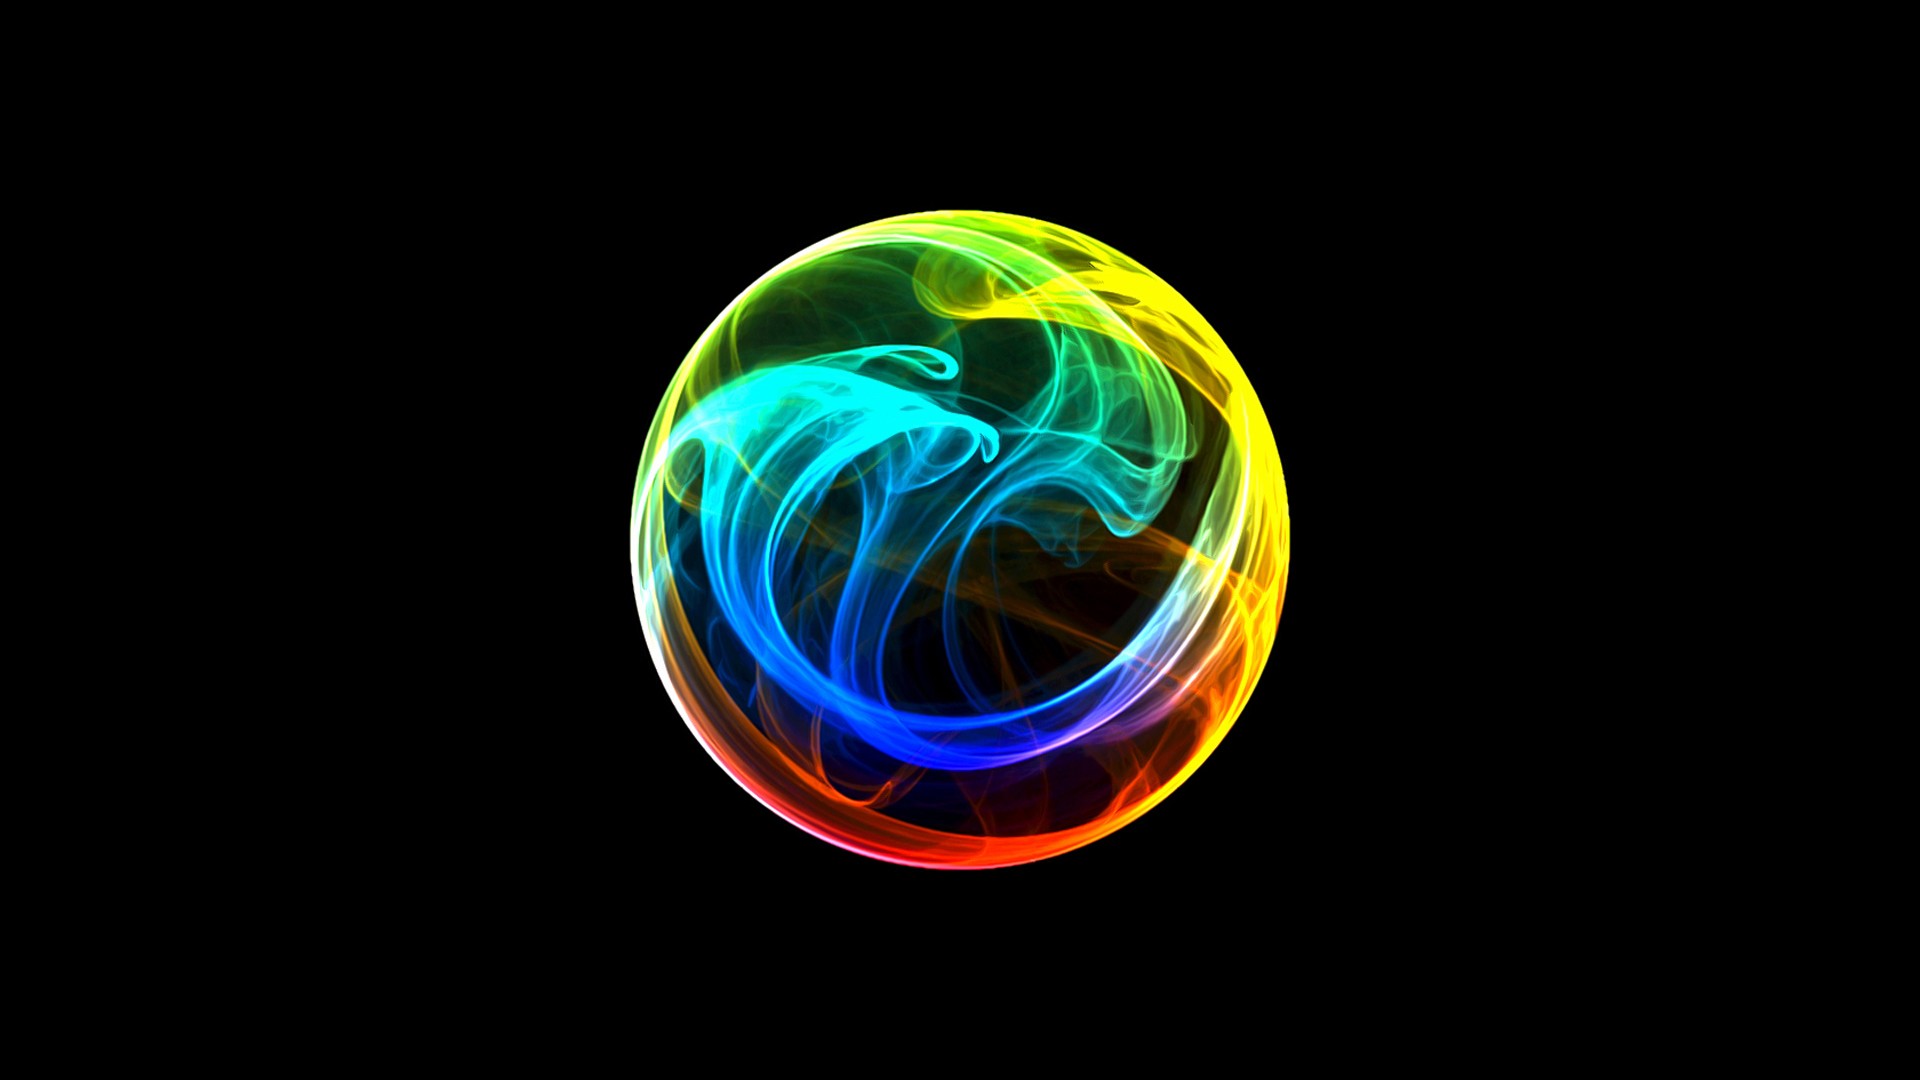 Colored Smoke Simple Background Smoke Colorful Sphere Blue Black Background Spectrum 1920x1080